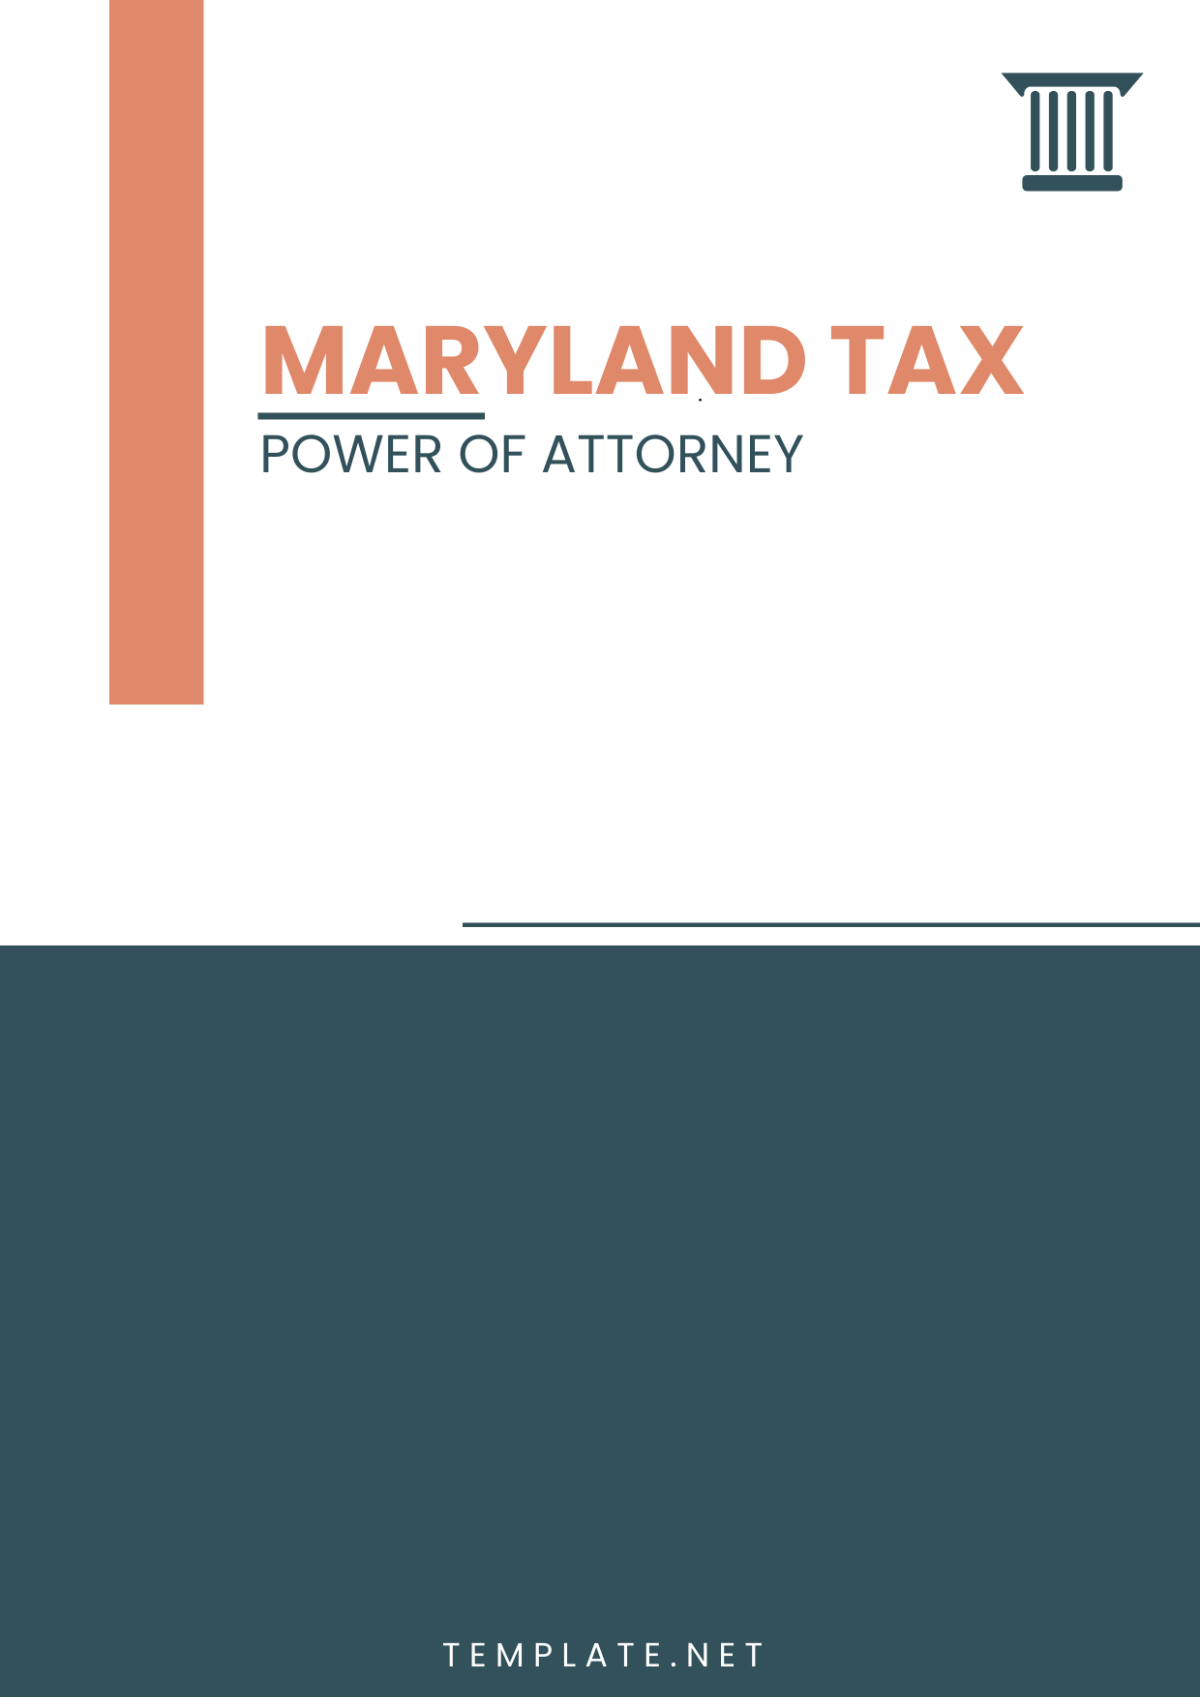 Free Maryland Tax Power of Attorney Template